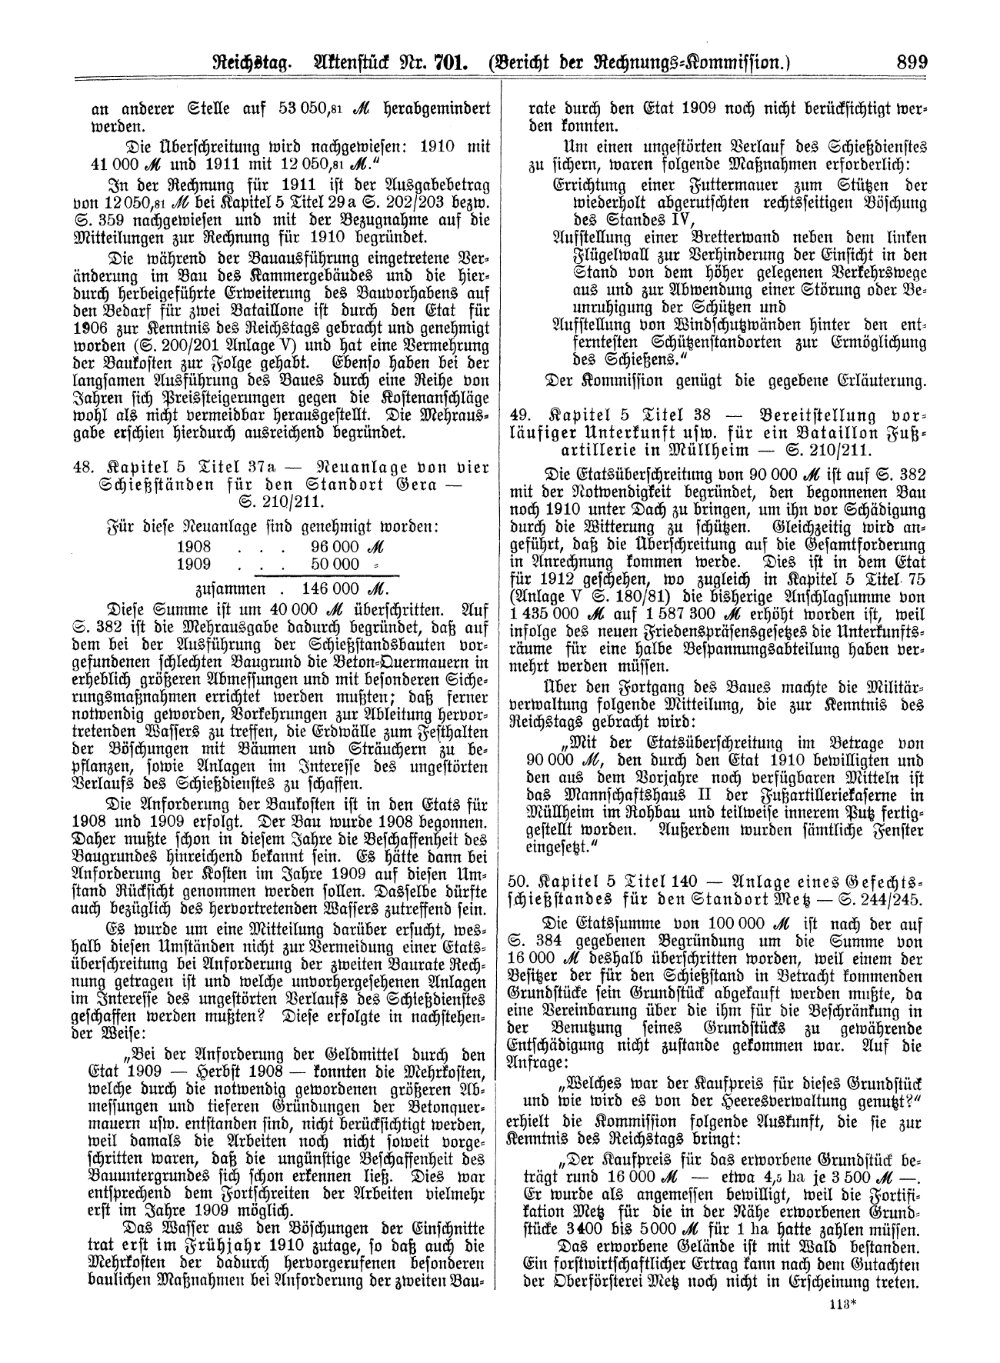 Scan of page 899